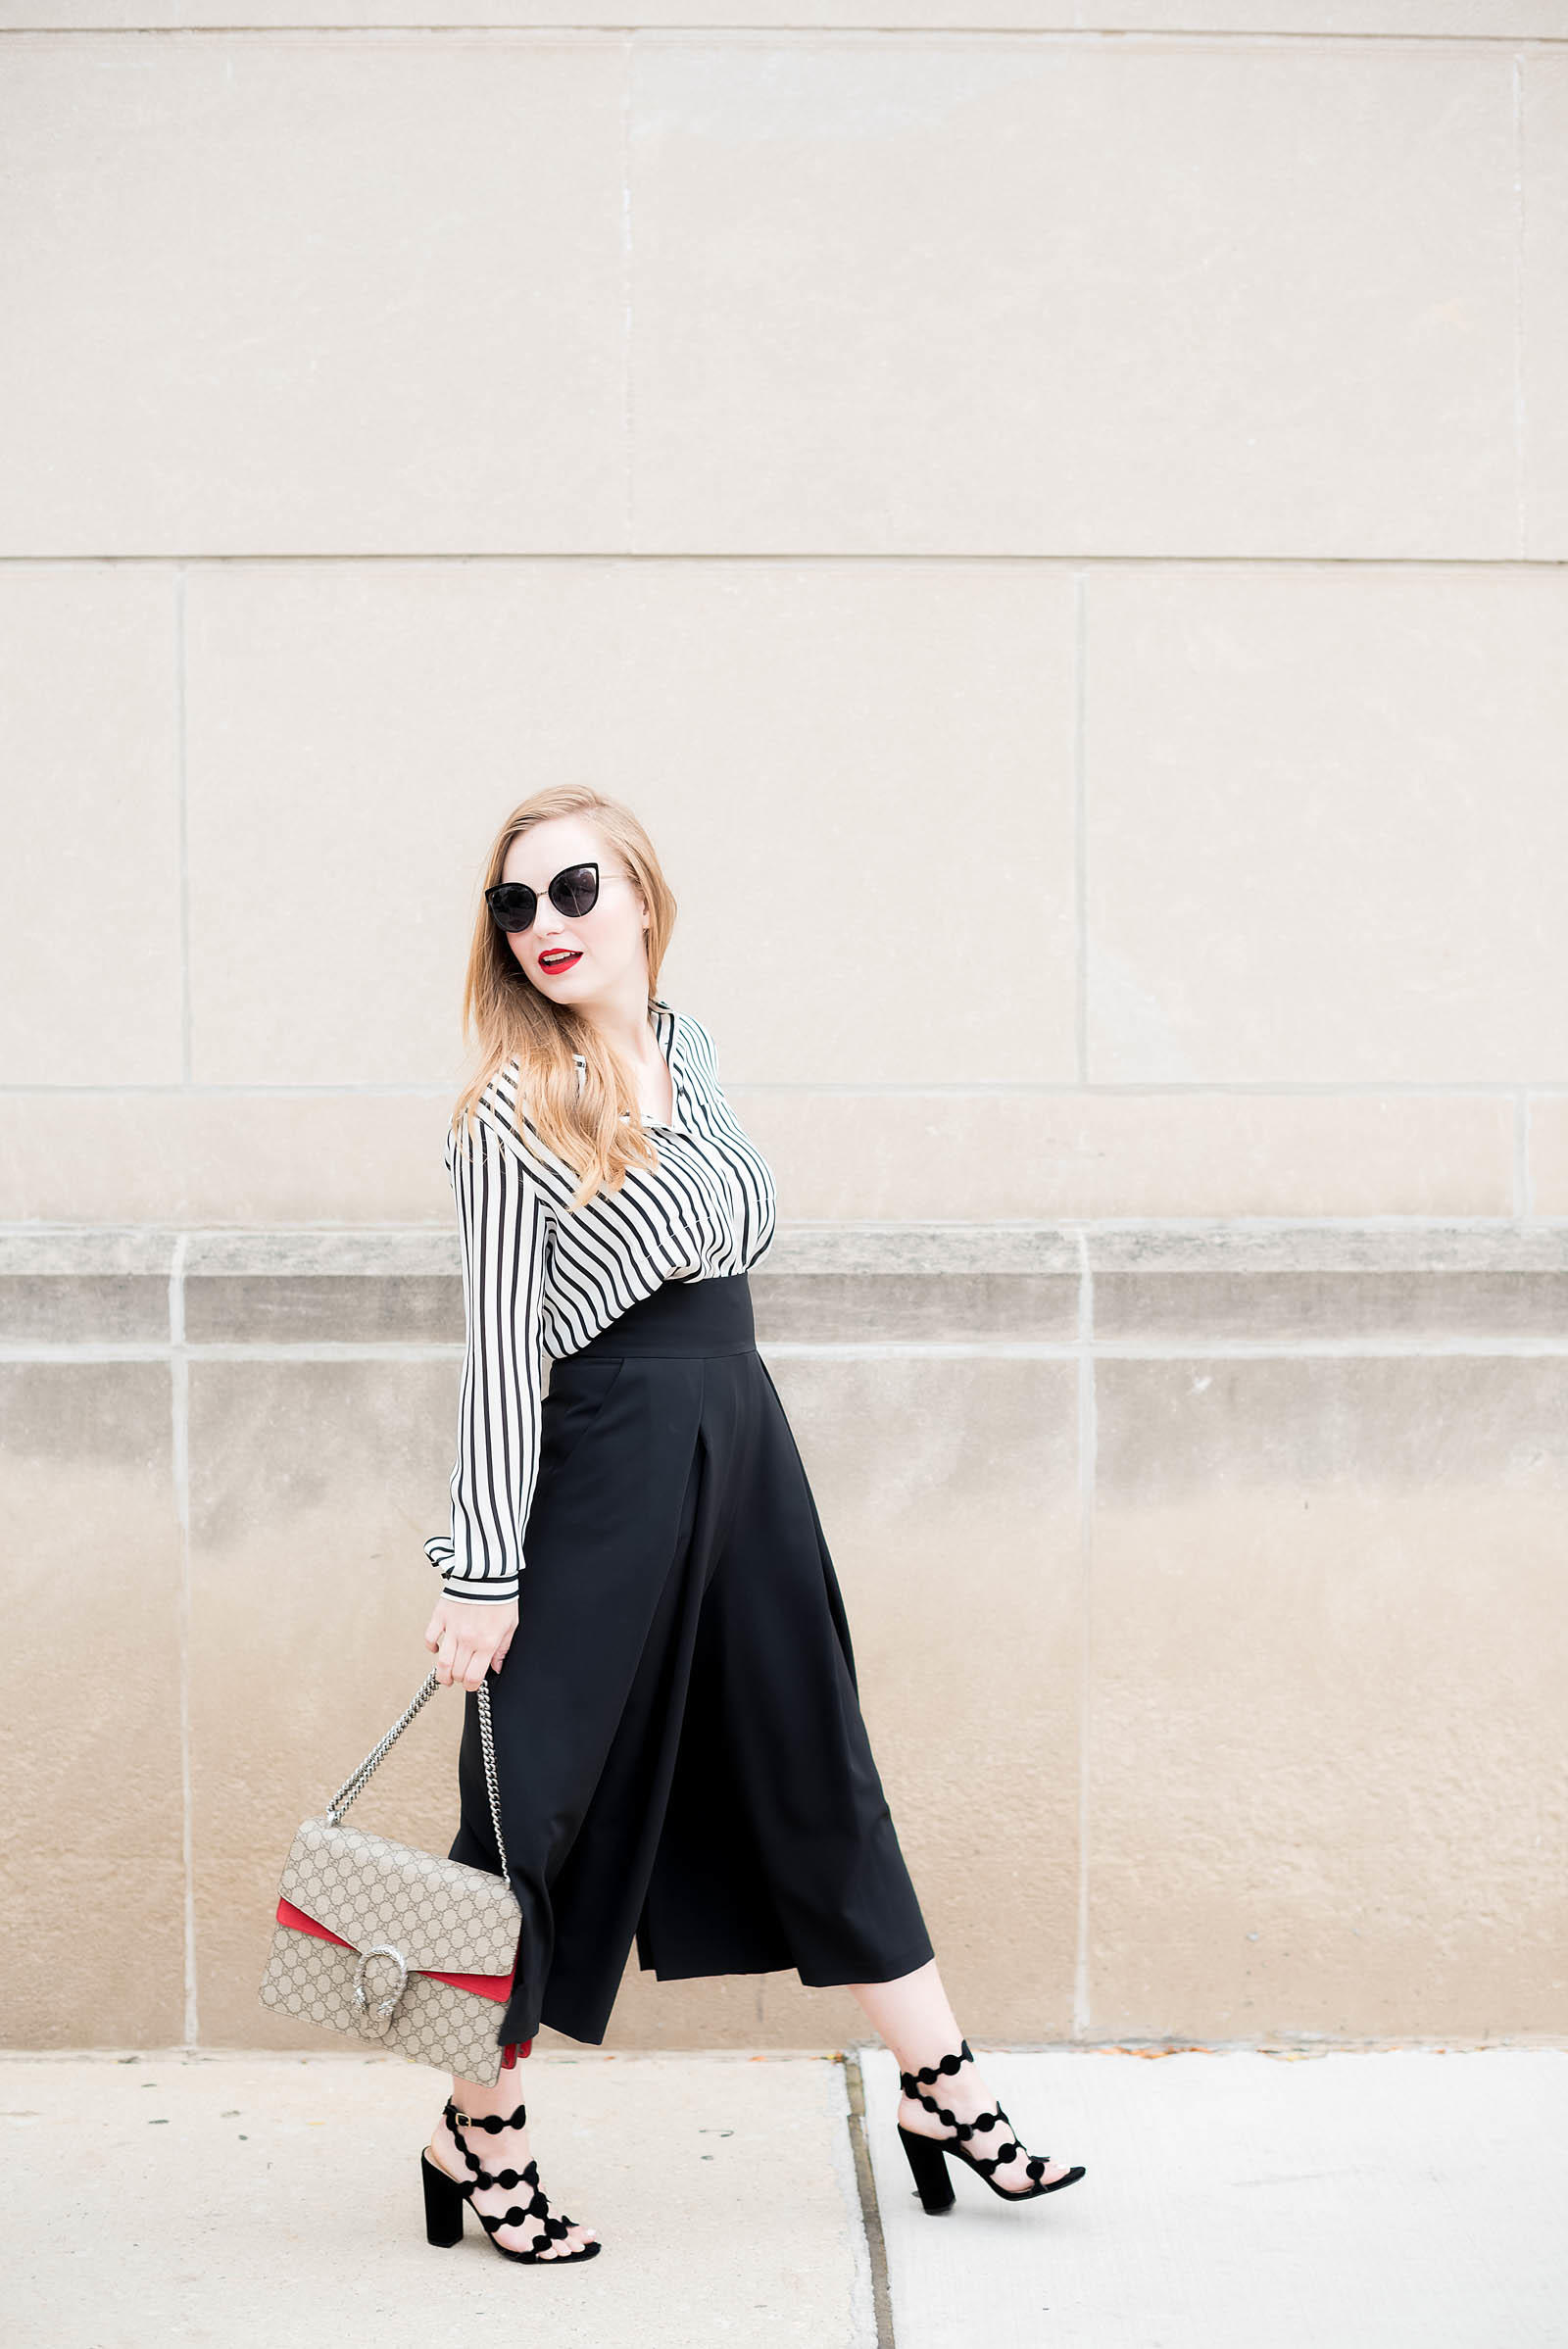 1940s Style Culotte Black White Red Outfit Inspiration